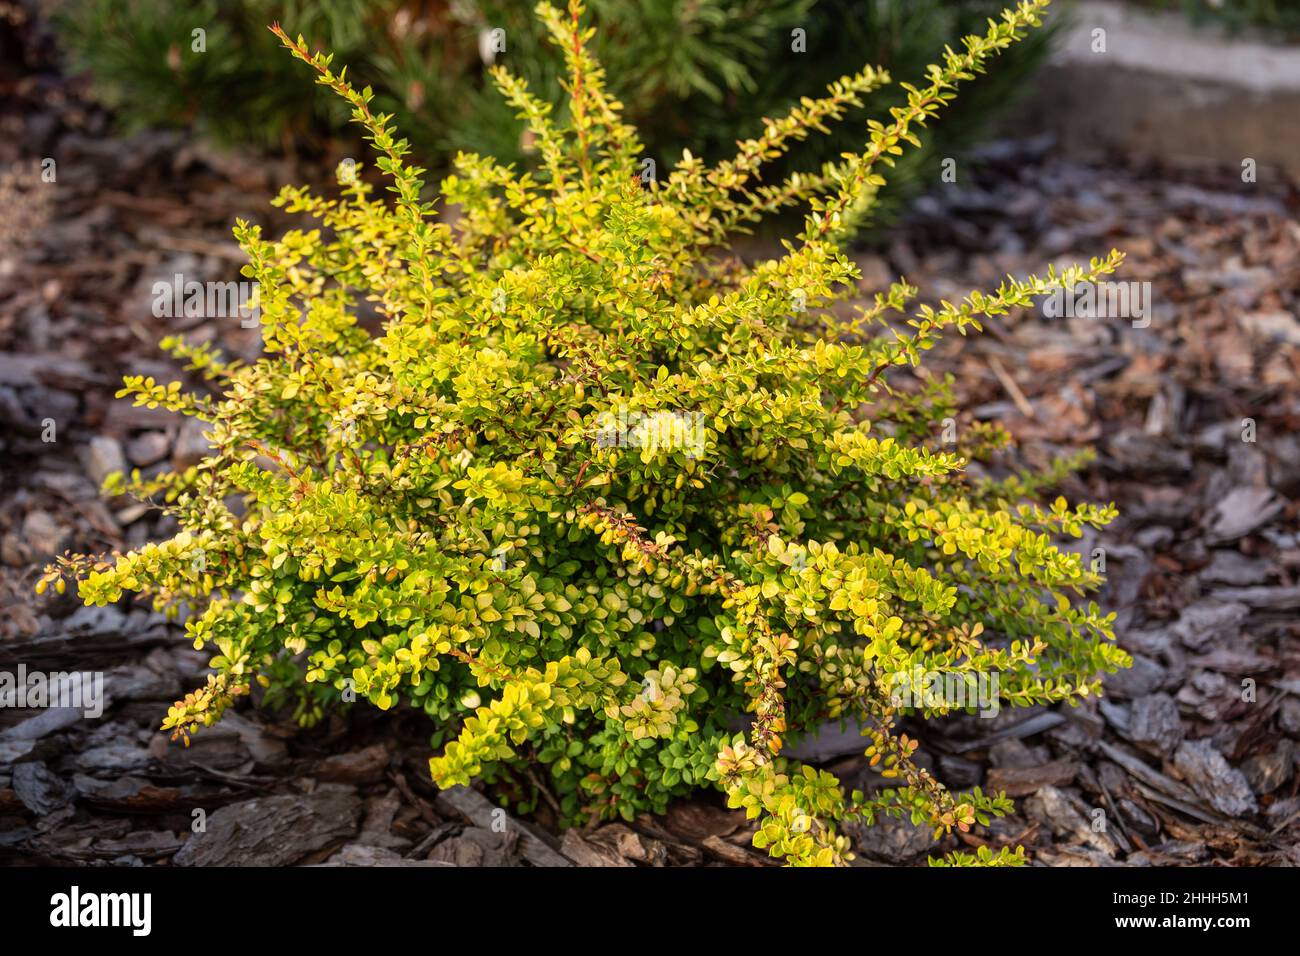 Young bush Japanese barberry or Berberis thunbergii varieties Sensation with yellow and green leaves in landscaping. low growing ornamental plant Stock Photo